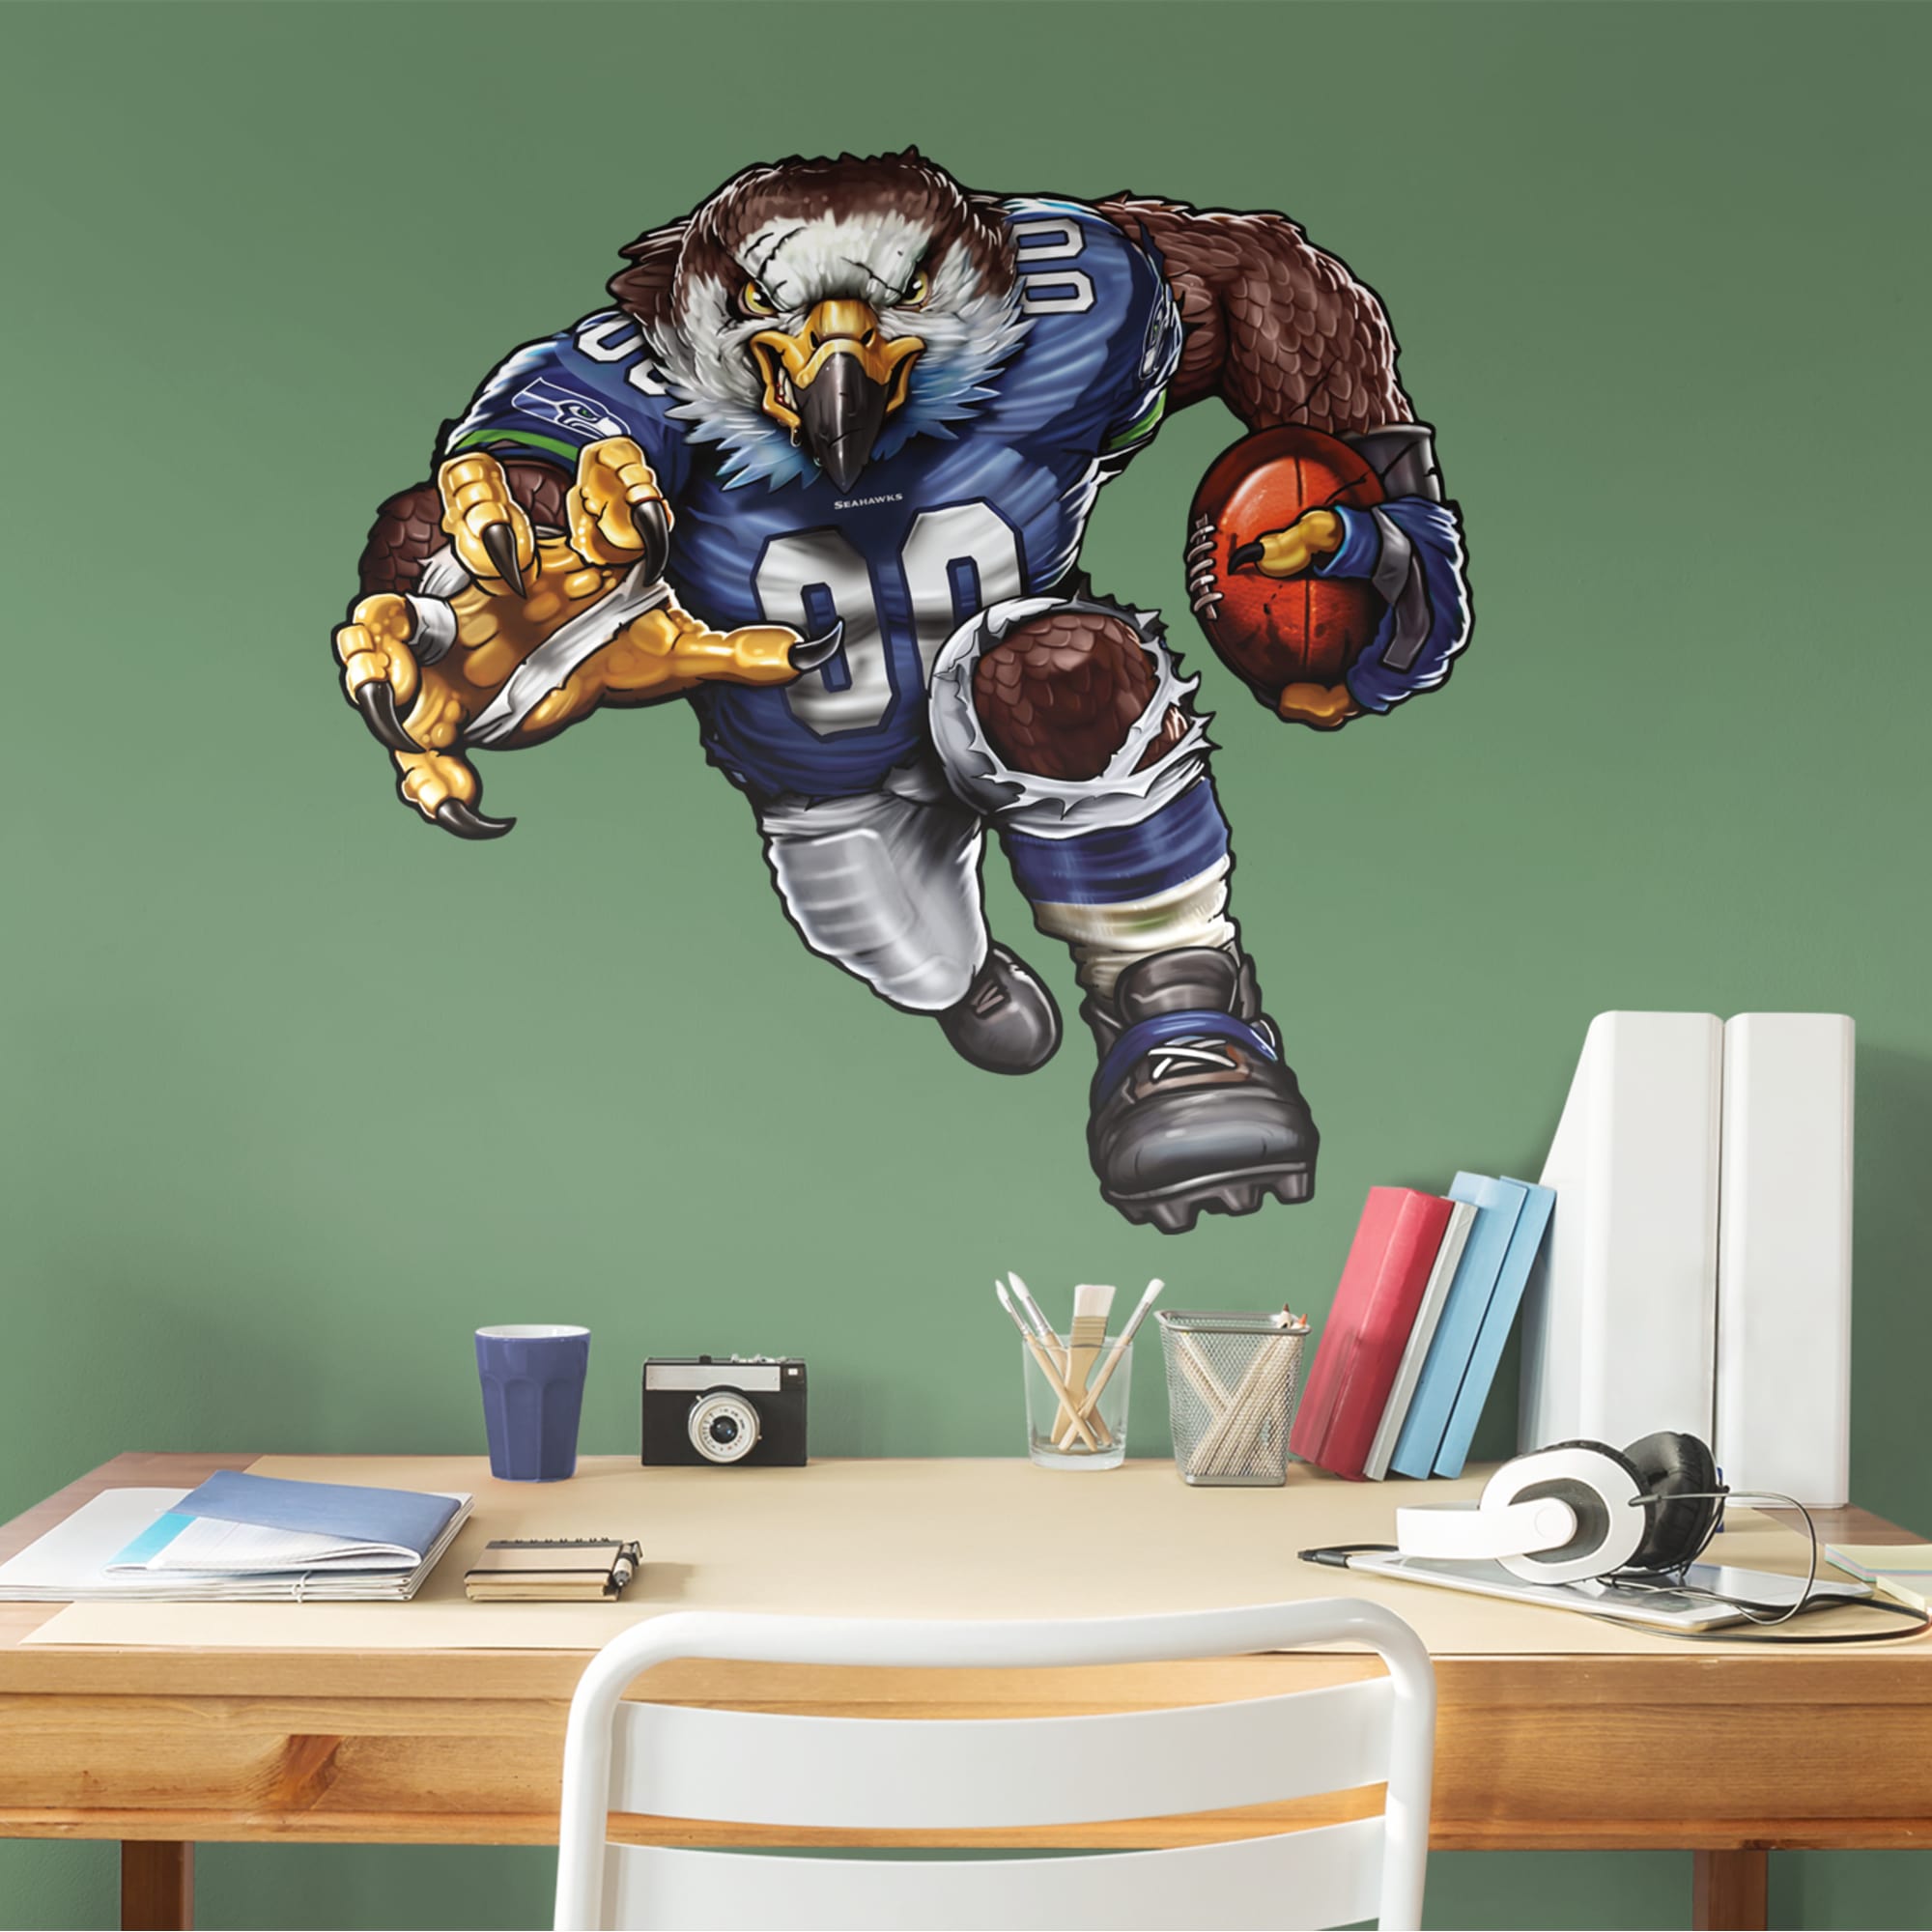 Seattle Seahawks: Sinister Seahawk - Officially Licensed NFL Removable Wall Decal 38.0"W x 38.0"H by Fathead | Vinyl